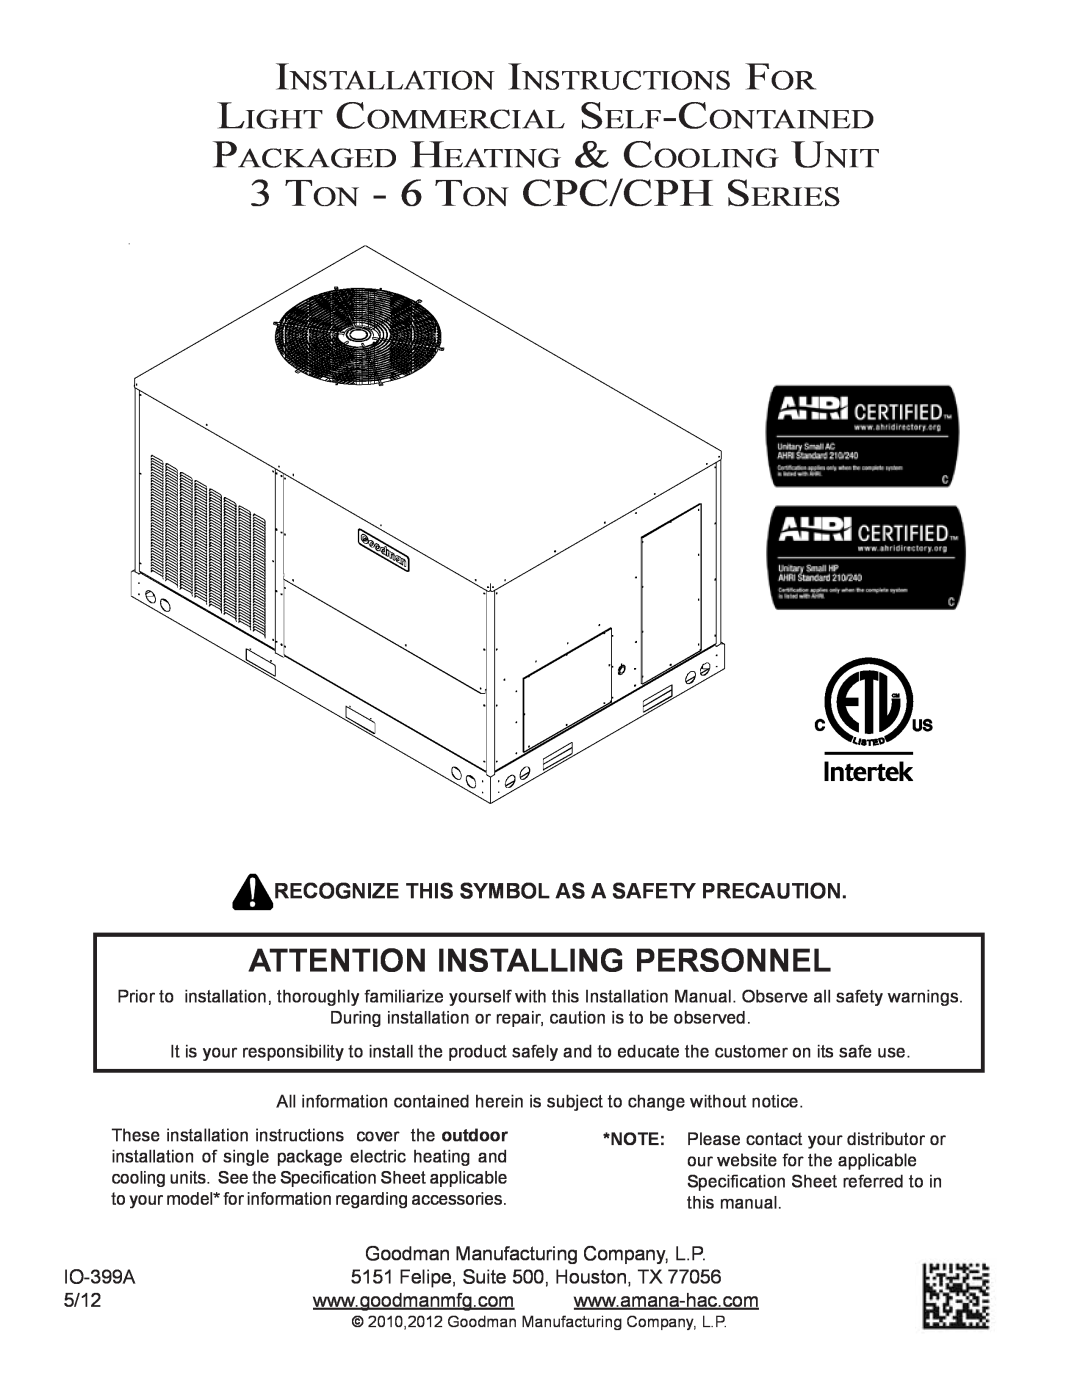 Goodman Mfg installation instructions TON - 6 TON CPC/CPH SERIES, Attention Installing Personnel, IO-399A, 5/12 